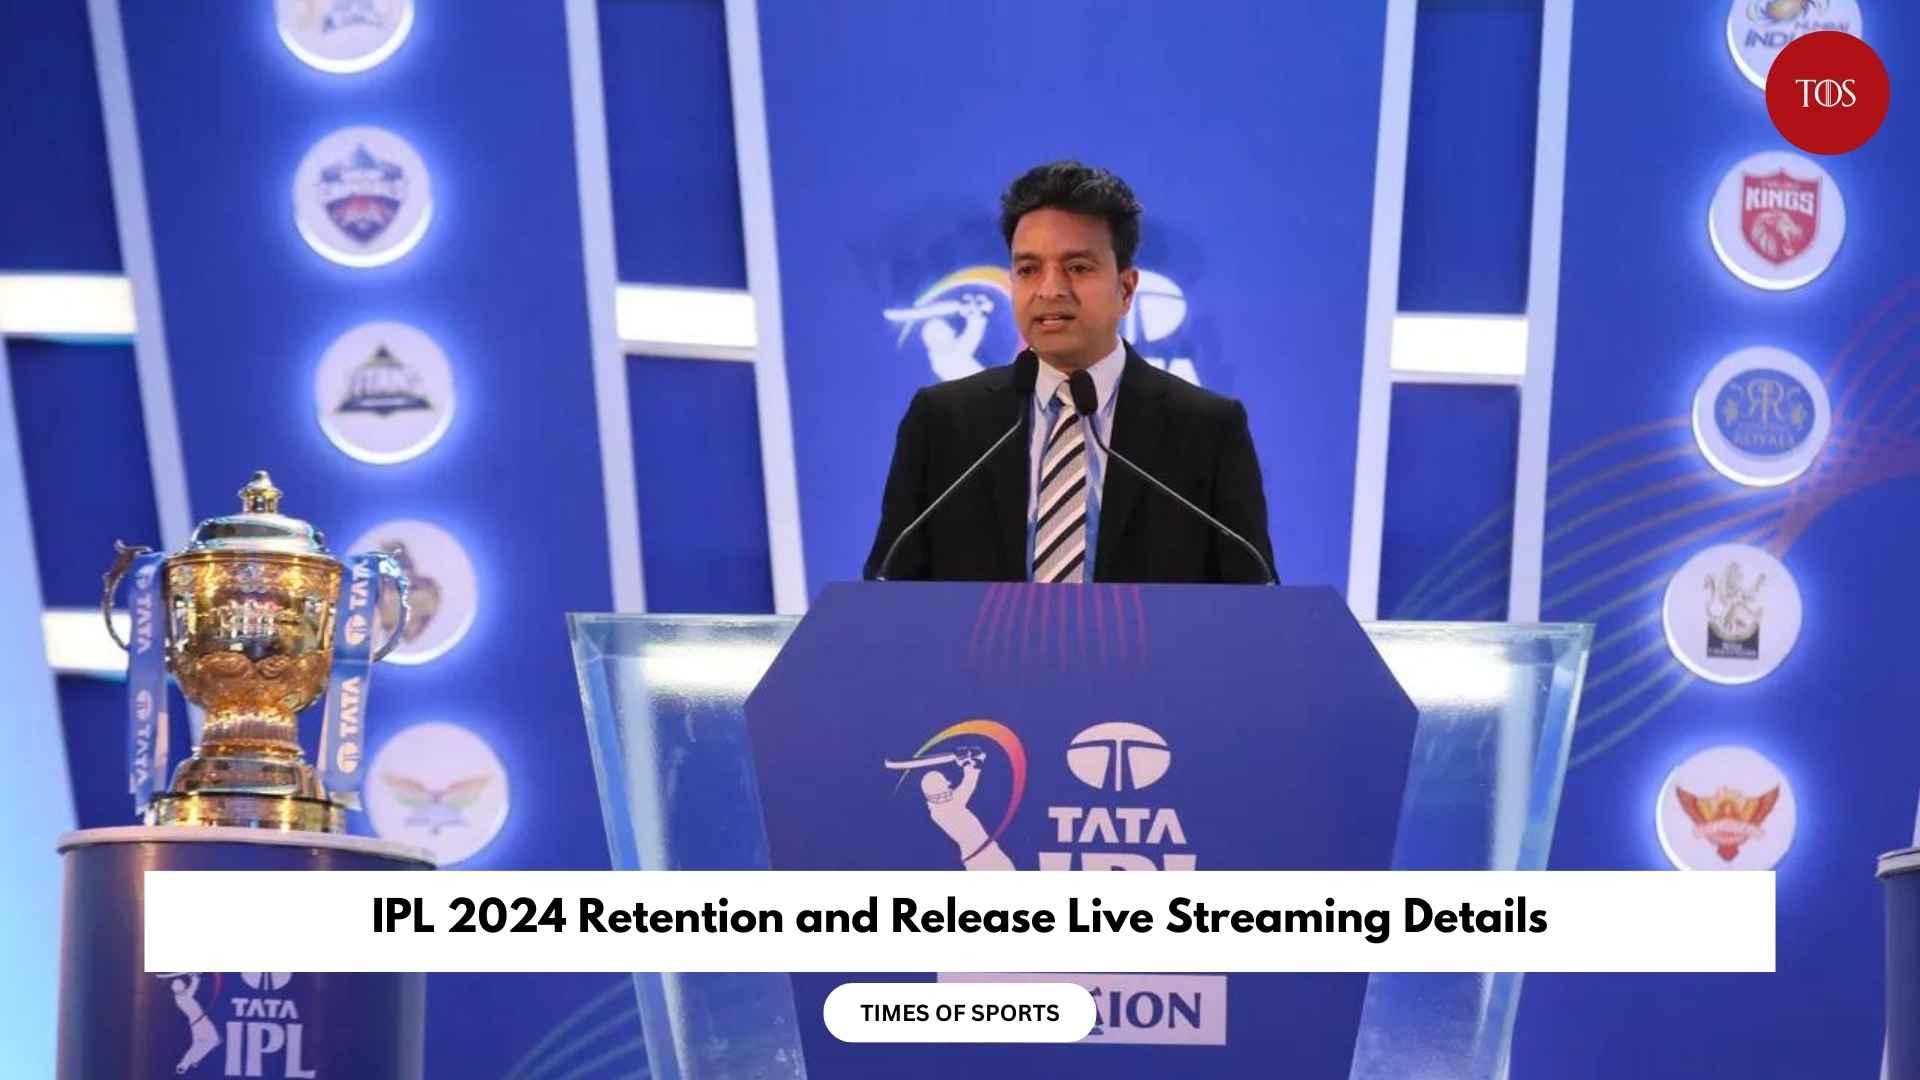 IPL 2024 Retention and Release Live Streaming Details